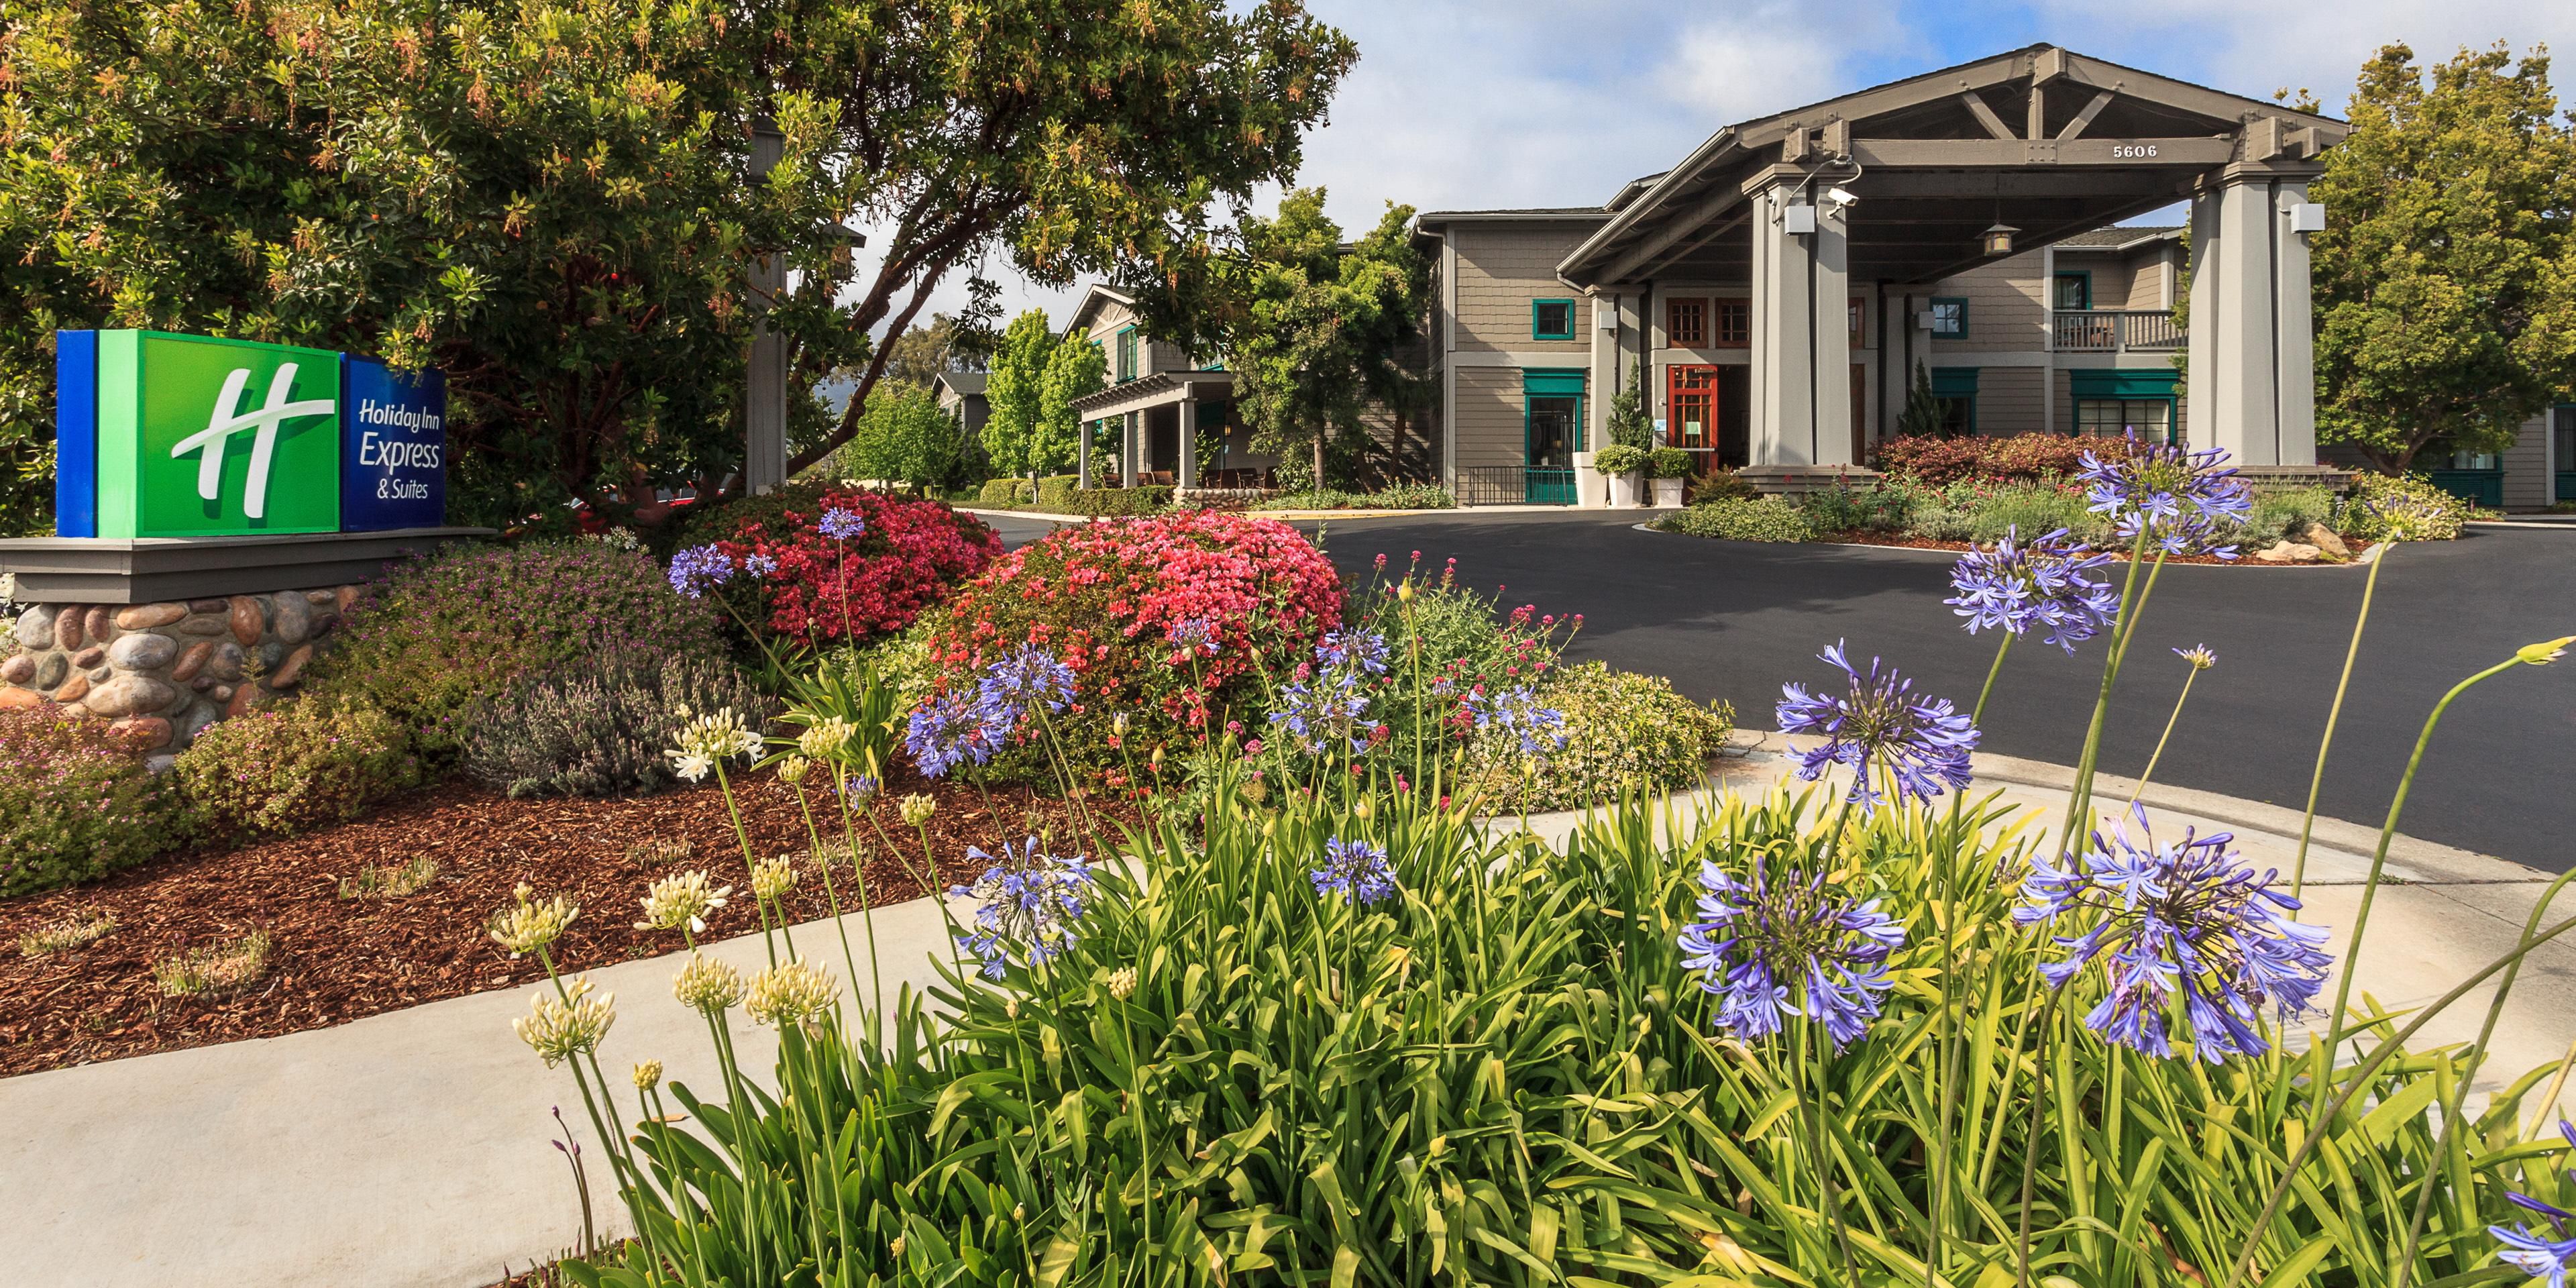 The Holiday Inn Express and Suites Carpinteria is pleased to offer electric vehicle Tesla and Universal charging stations, powered during the day by our extensive on site solar power generating facilities.